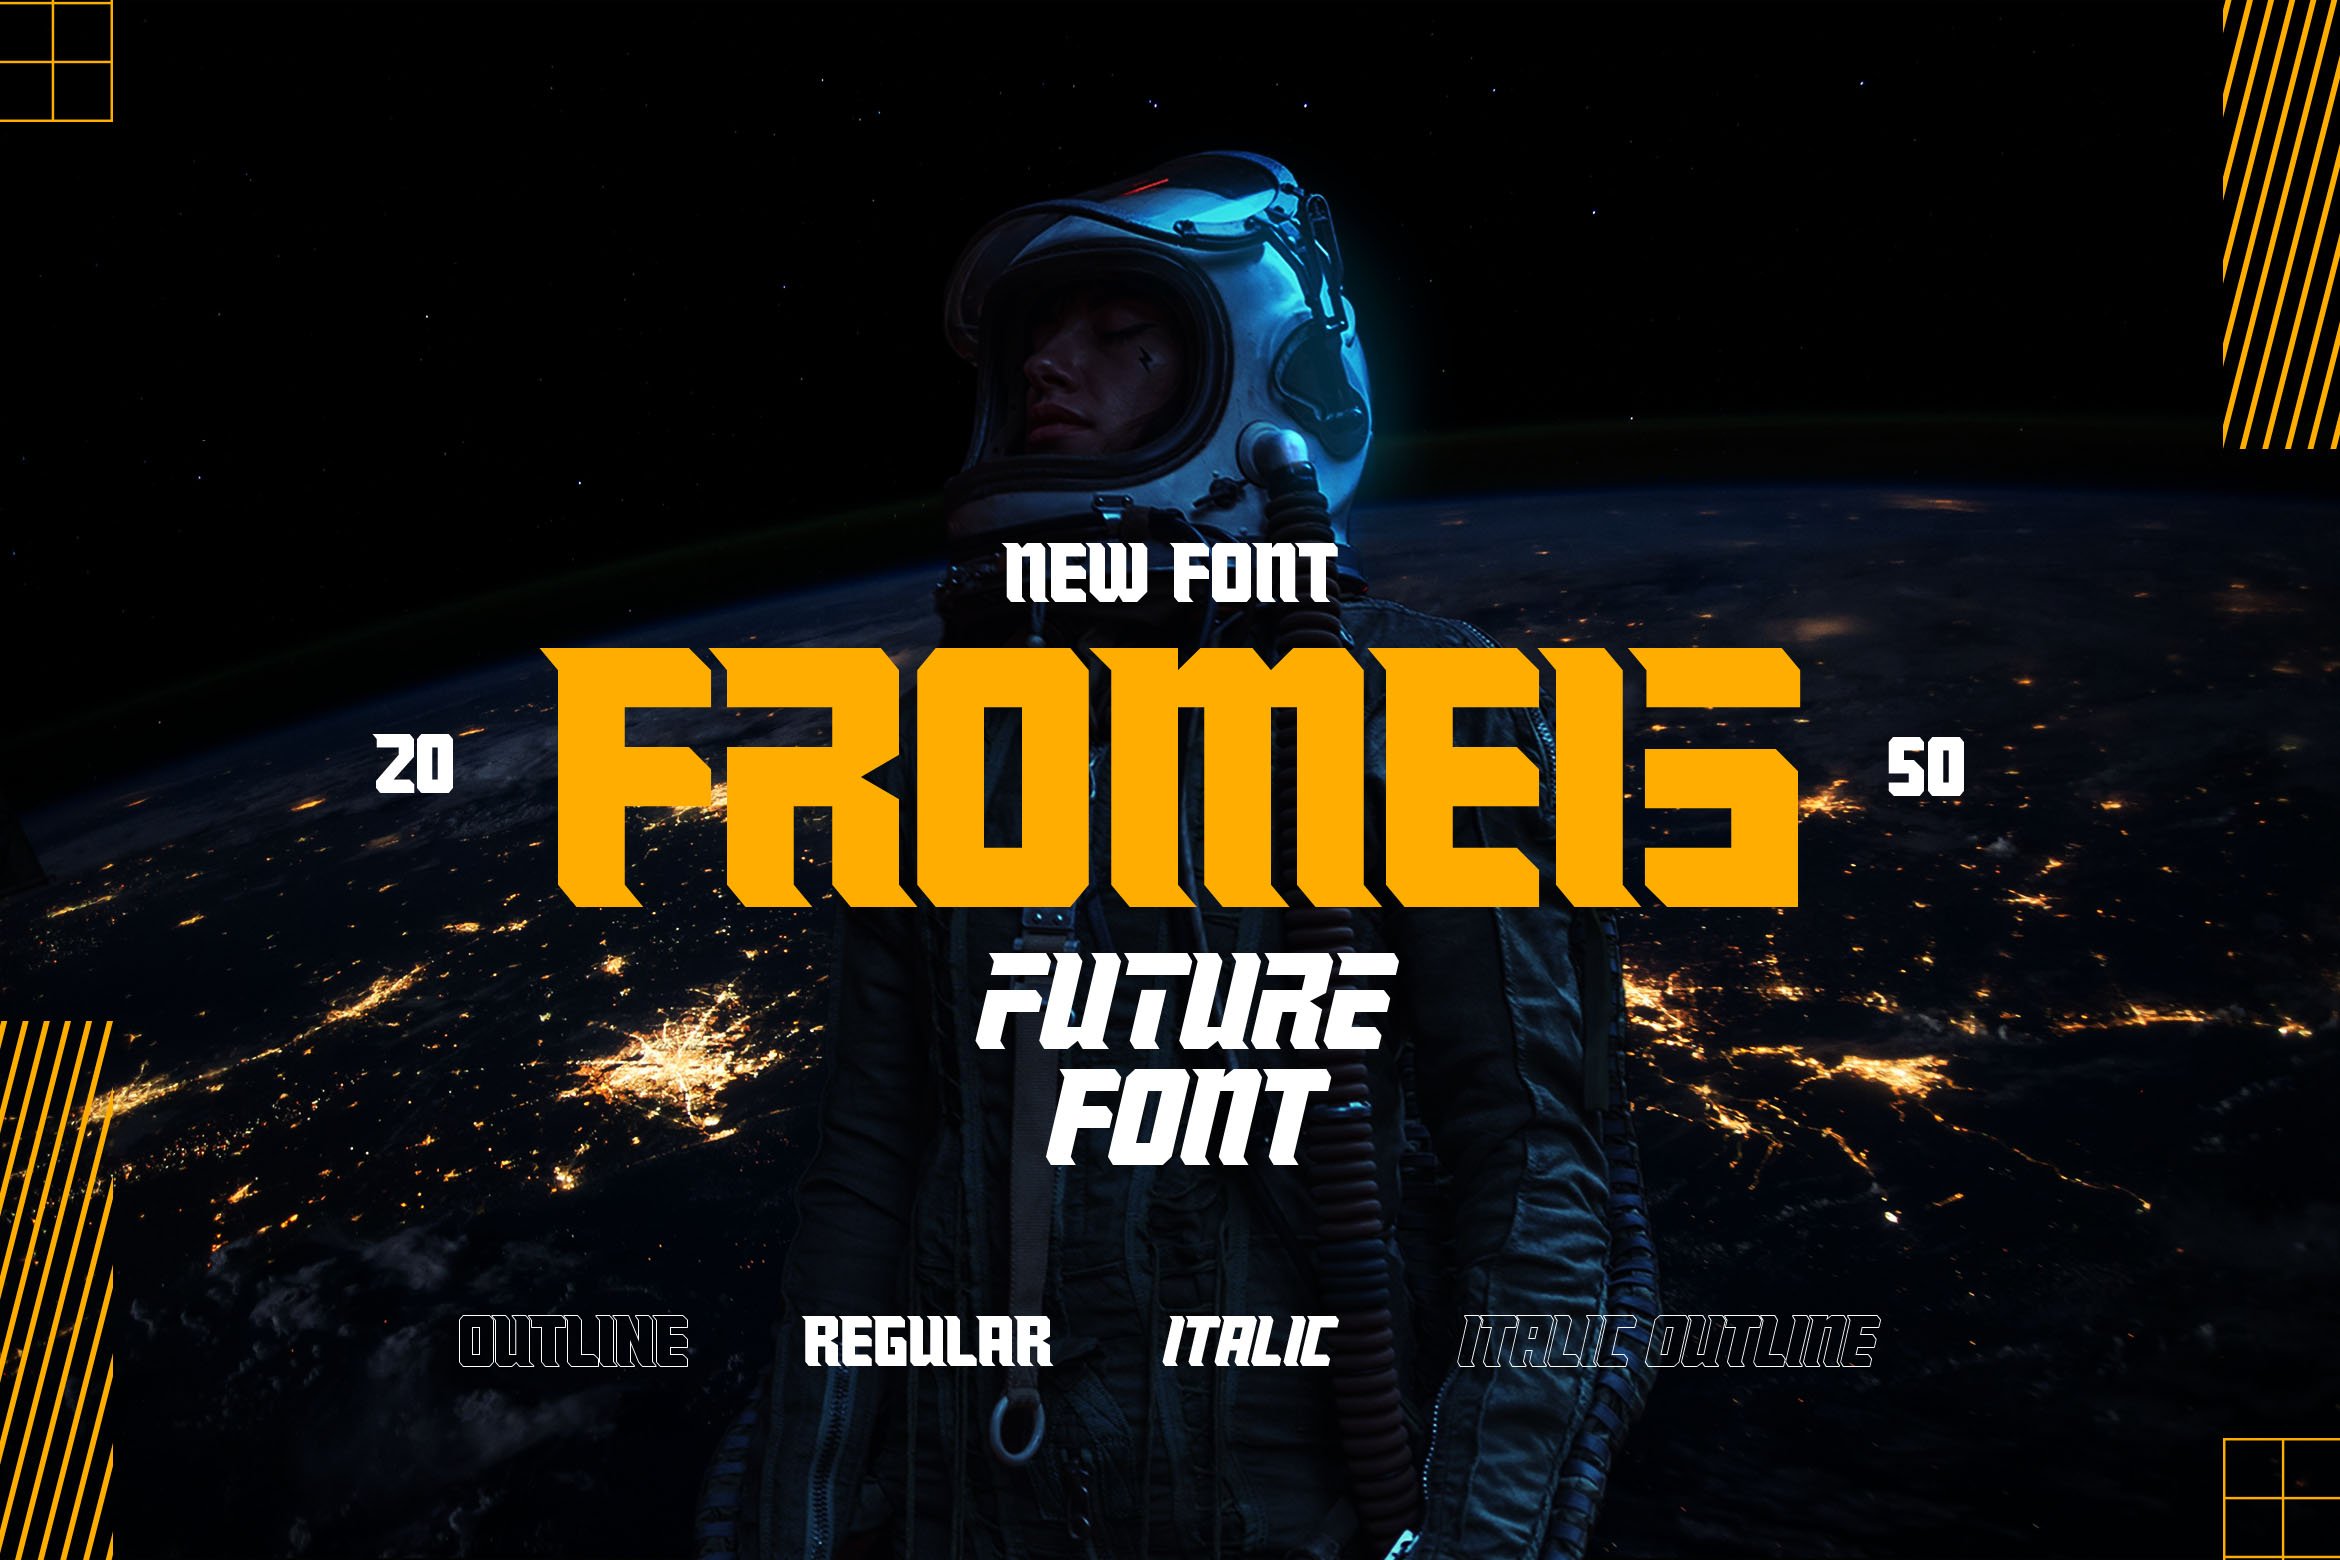 Fromeis - Future Font cover image.